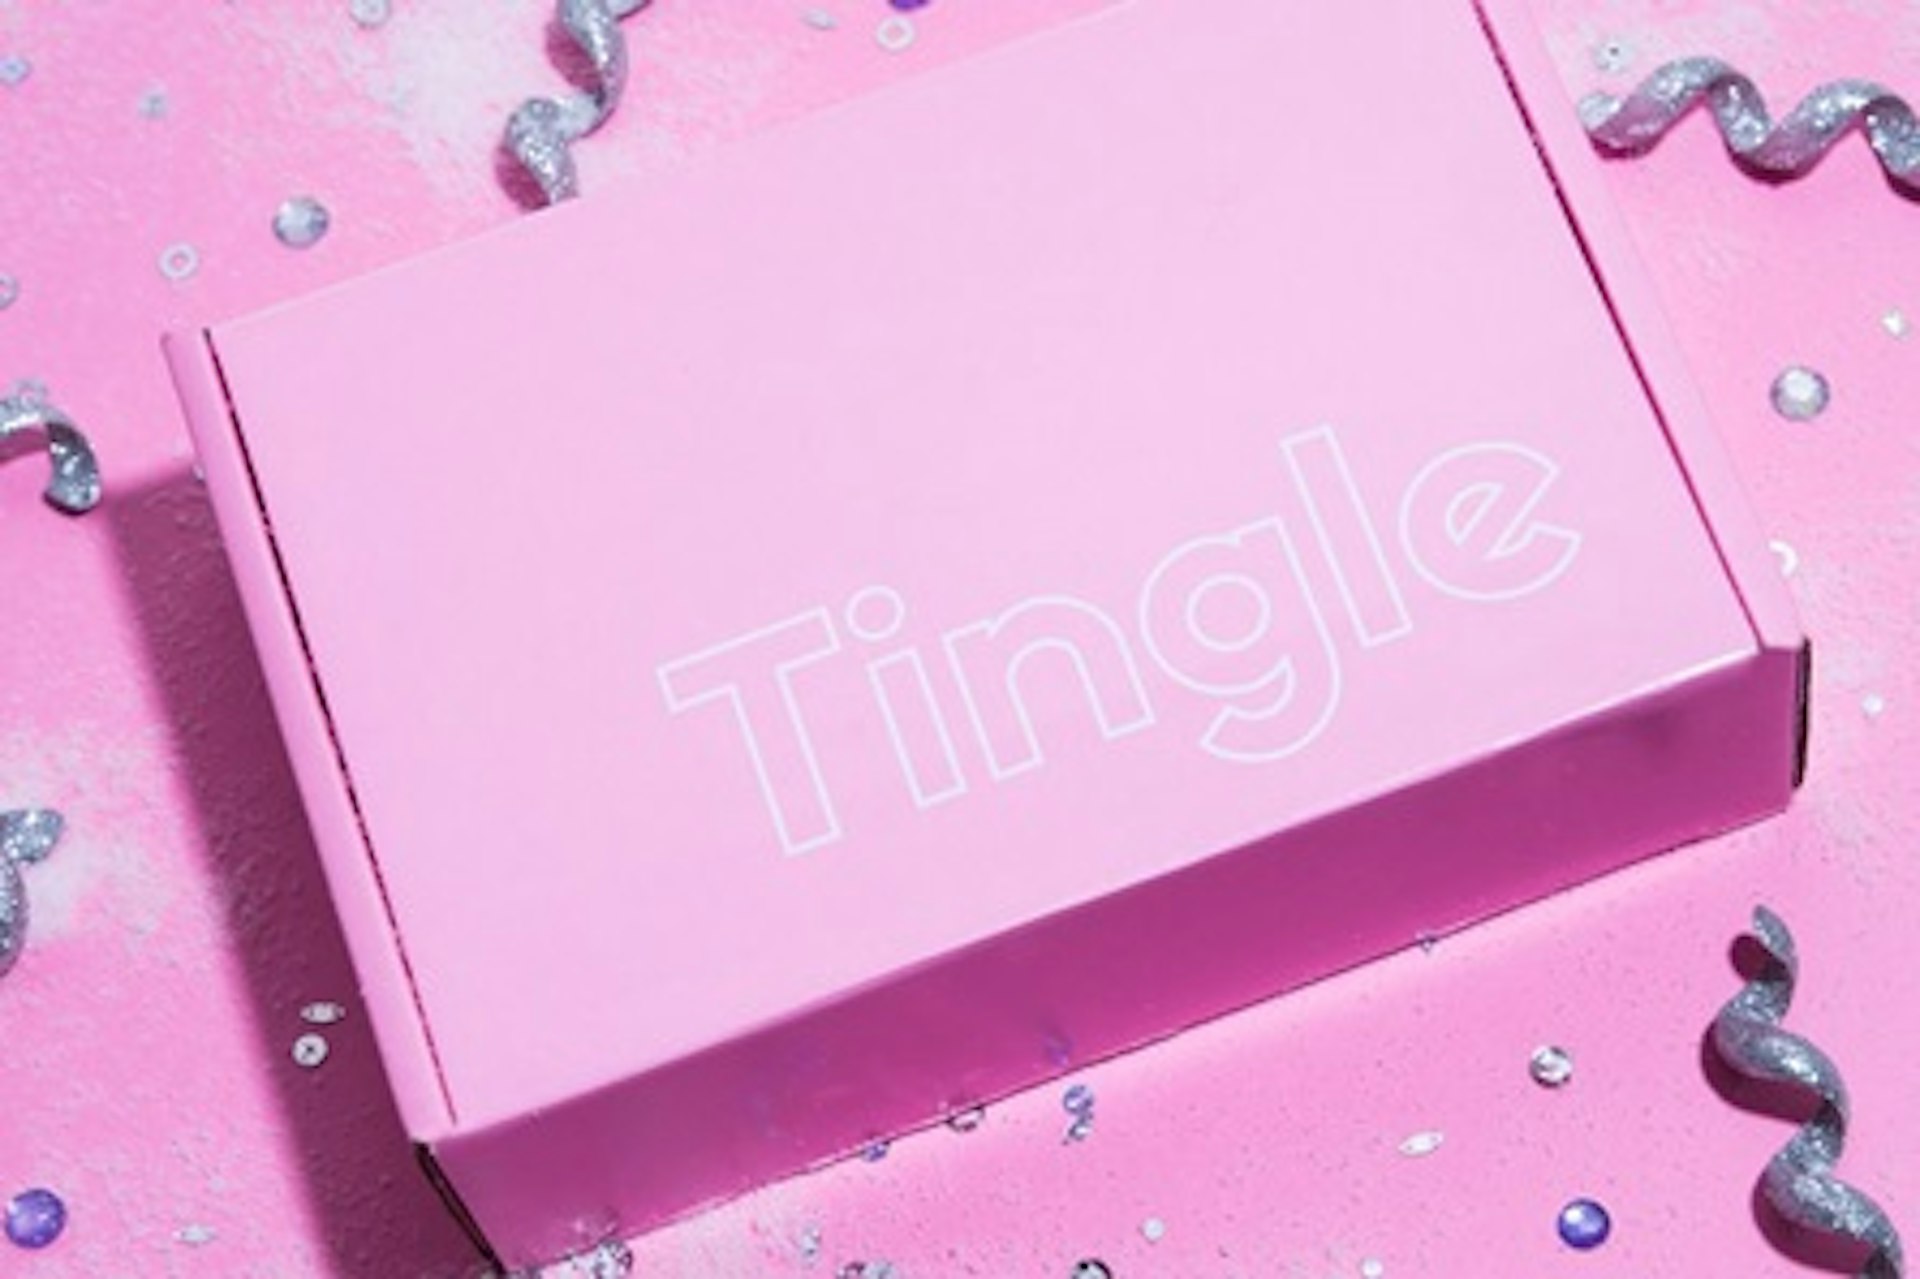 Six Month Self-Care Treat Box Subscription with Tingle 2